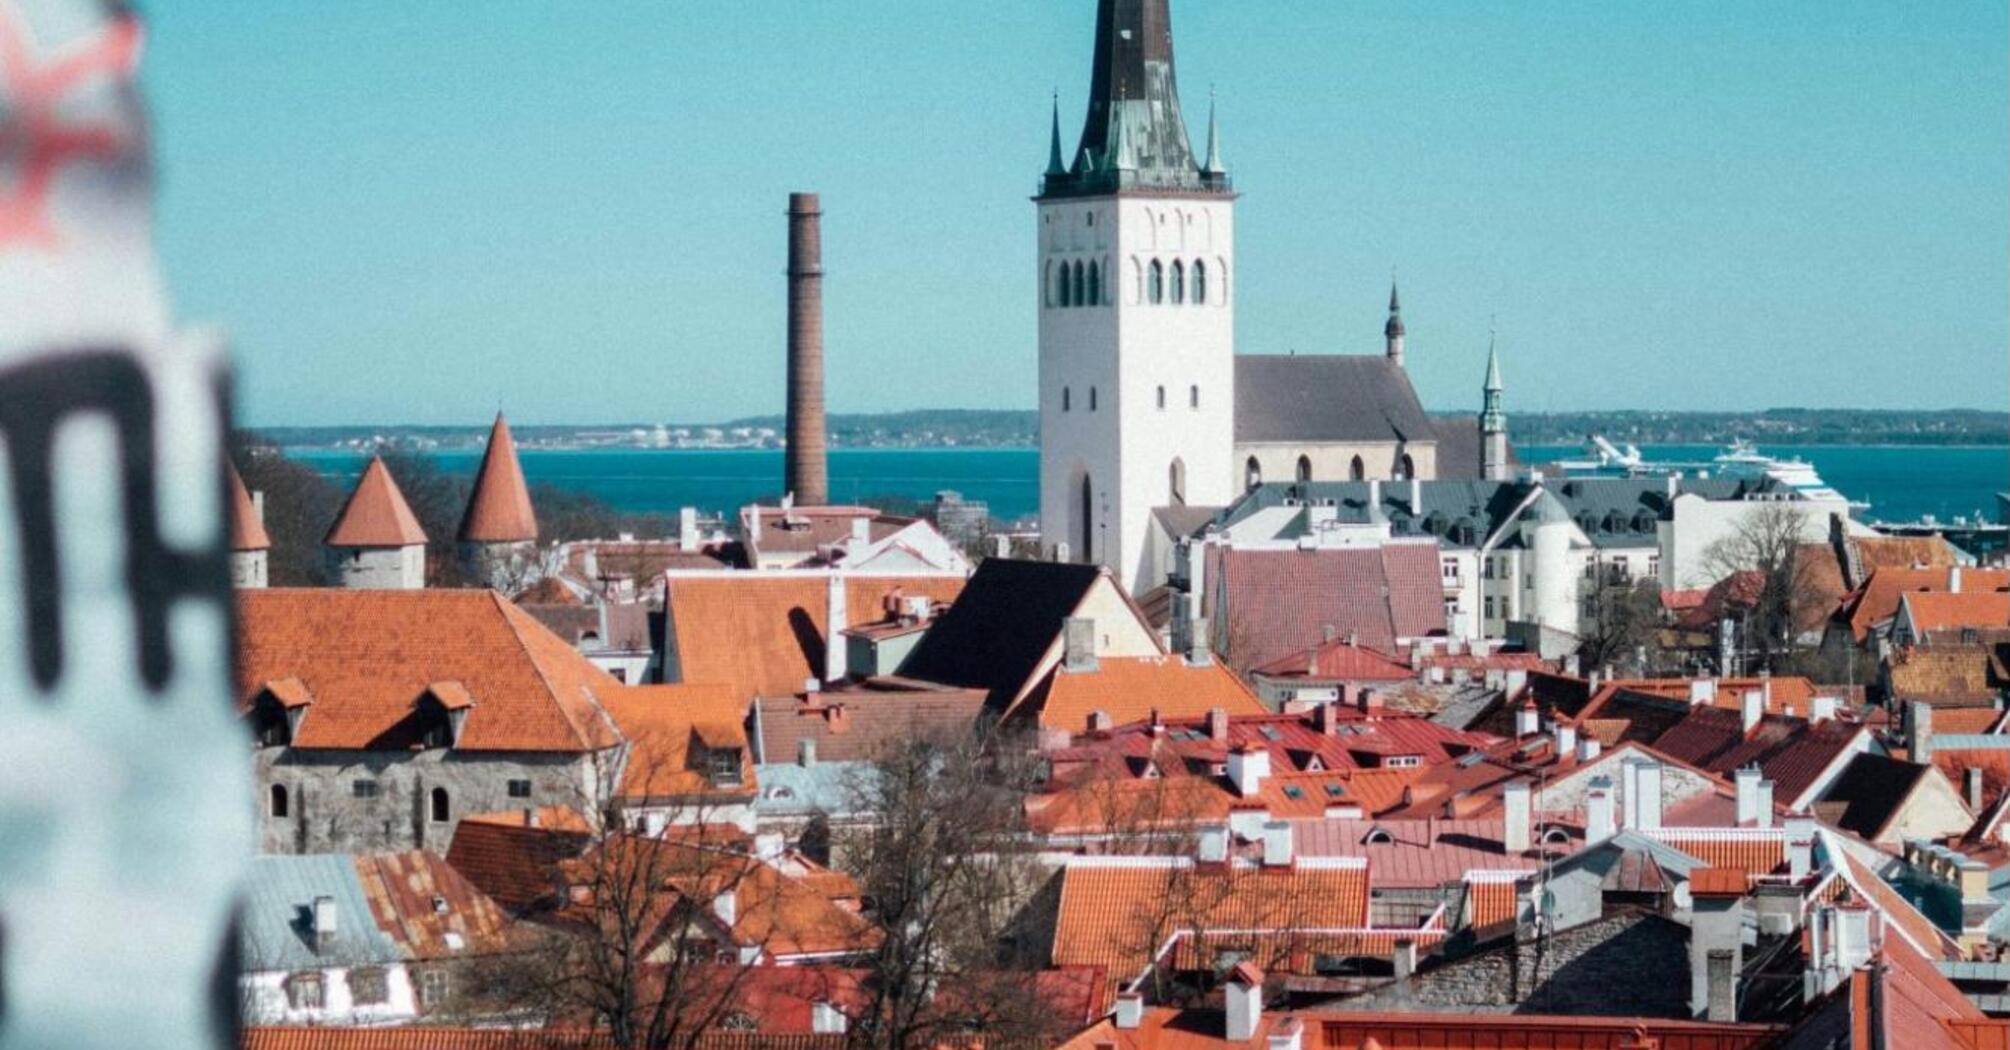 Buildings with red roofs in Tallinn city